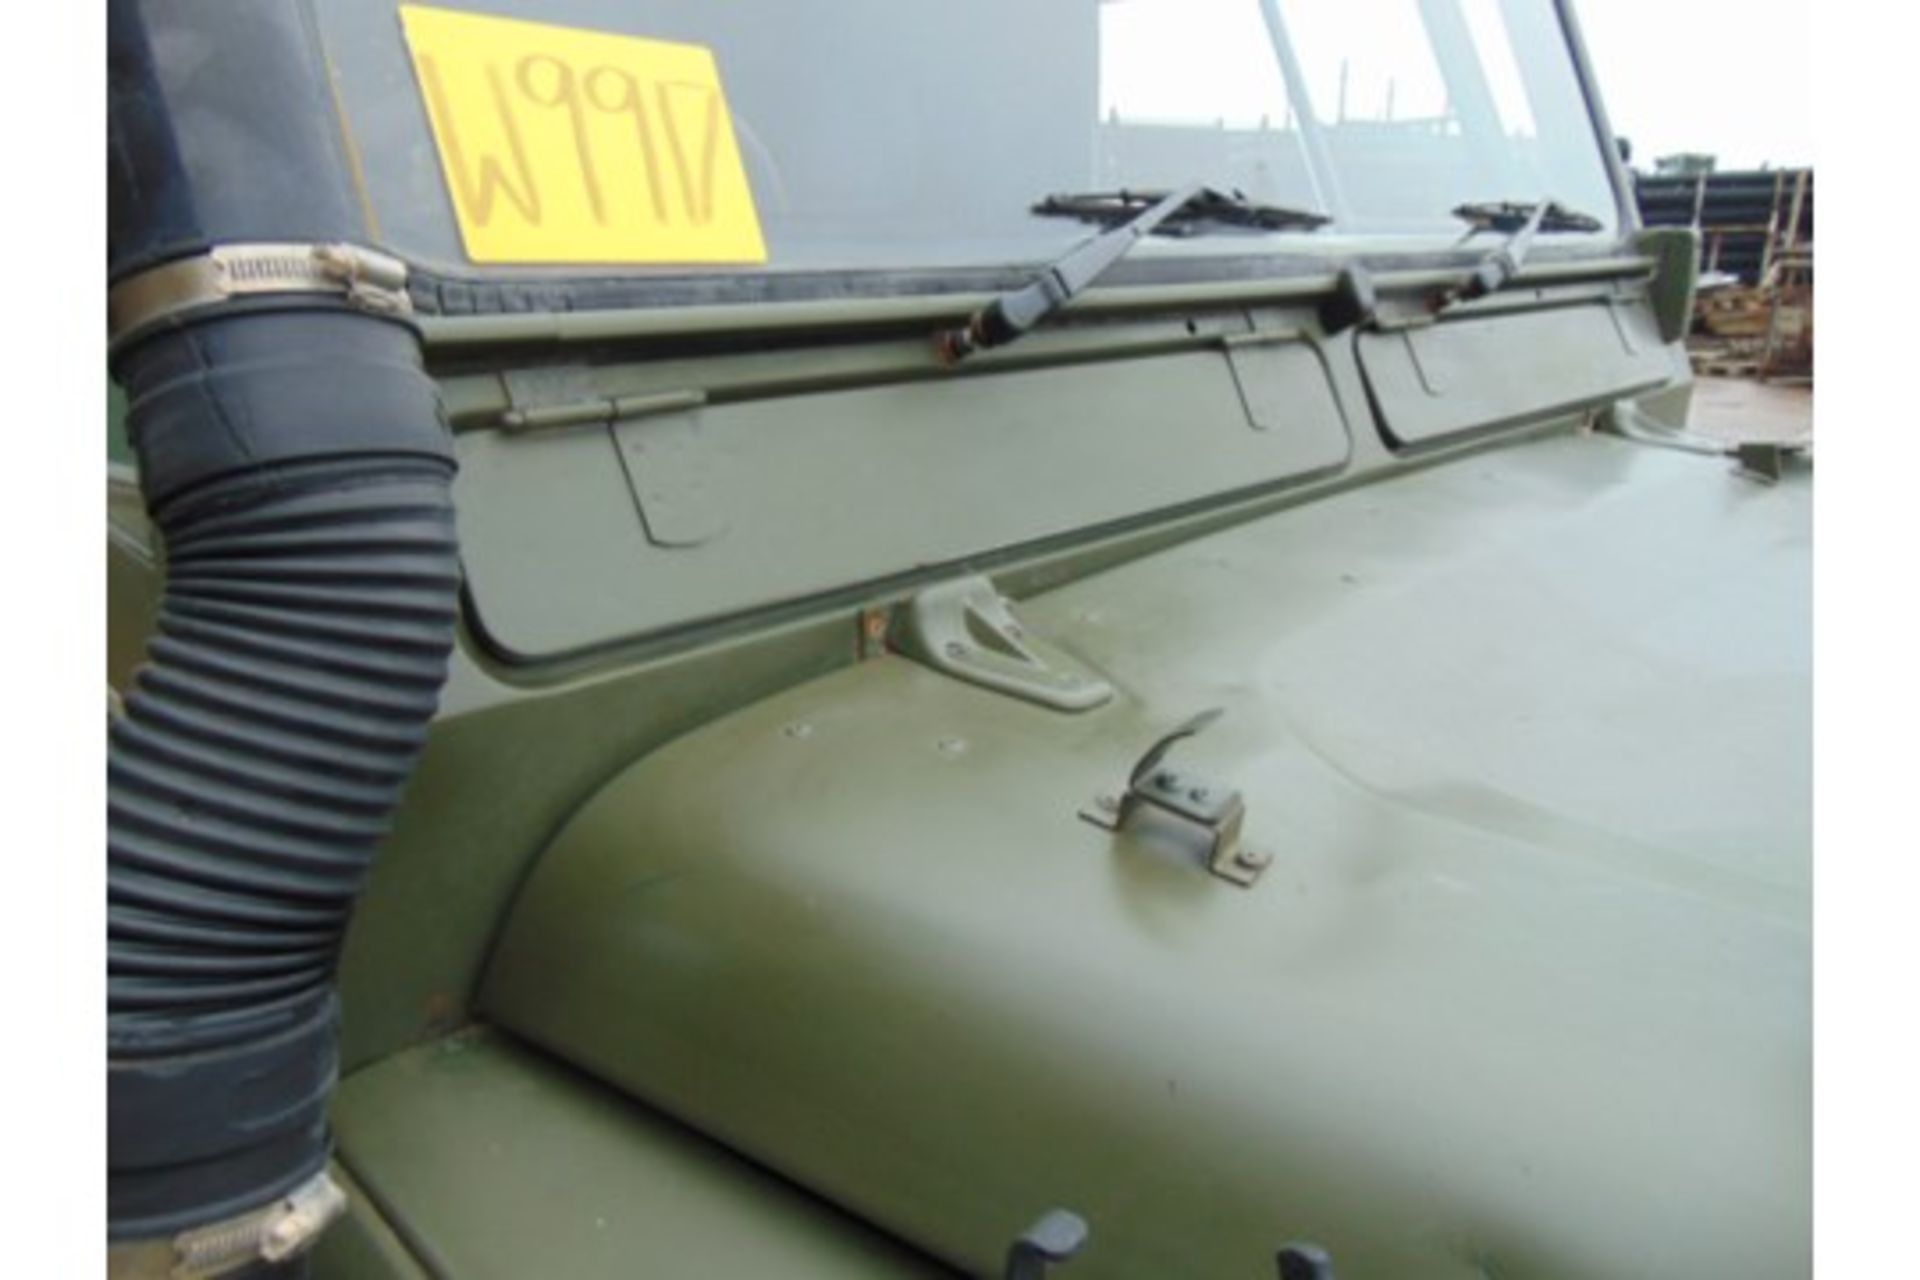 Land Rover Wolf 110 Hard Top - Image 10 of 21